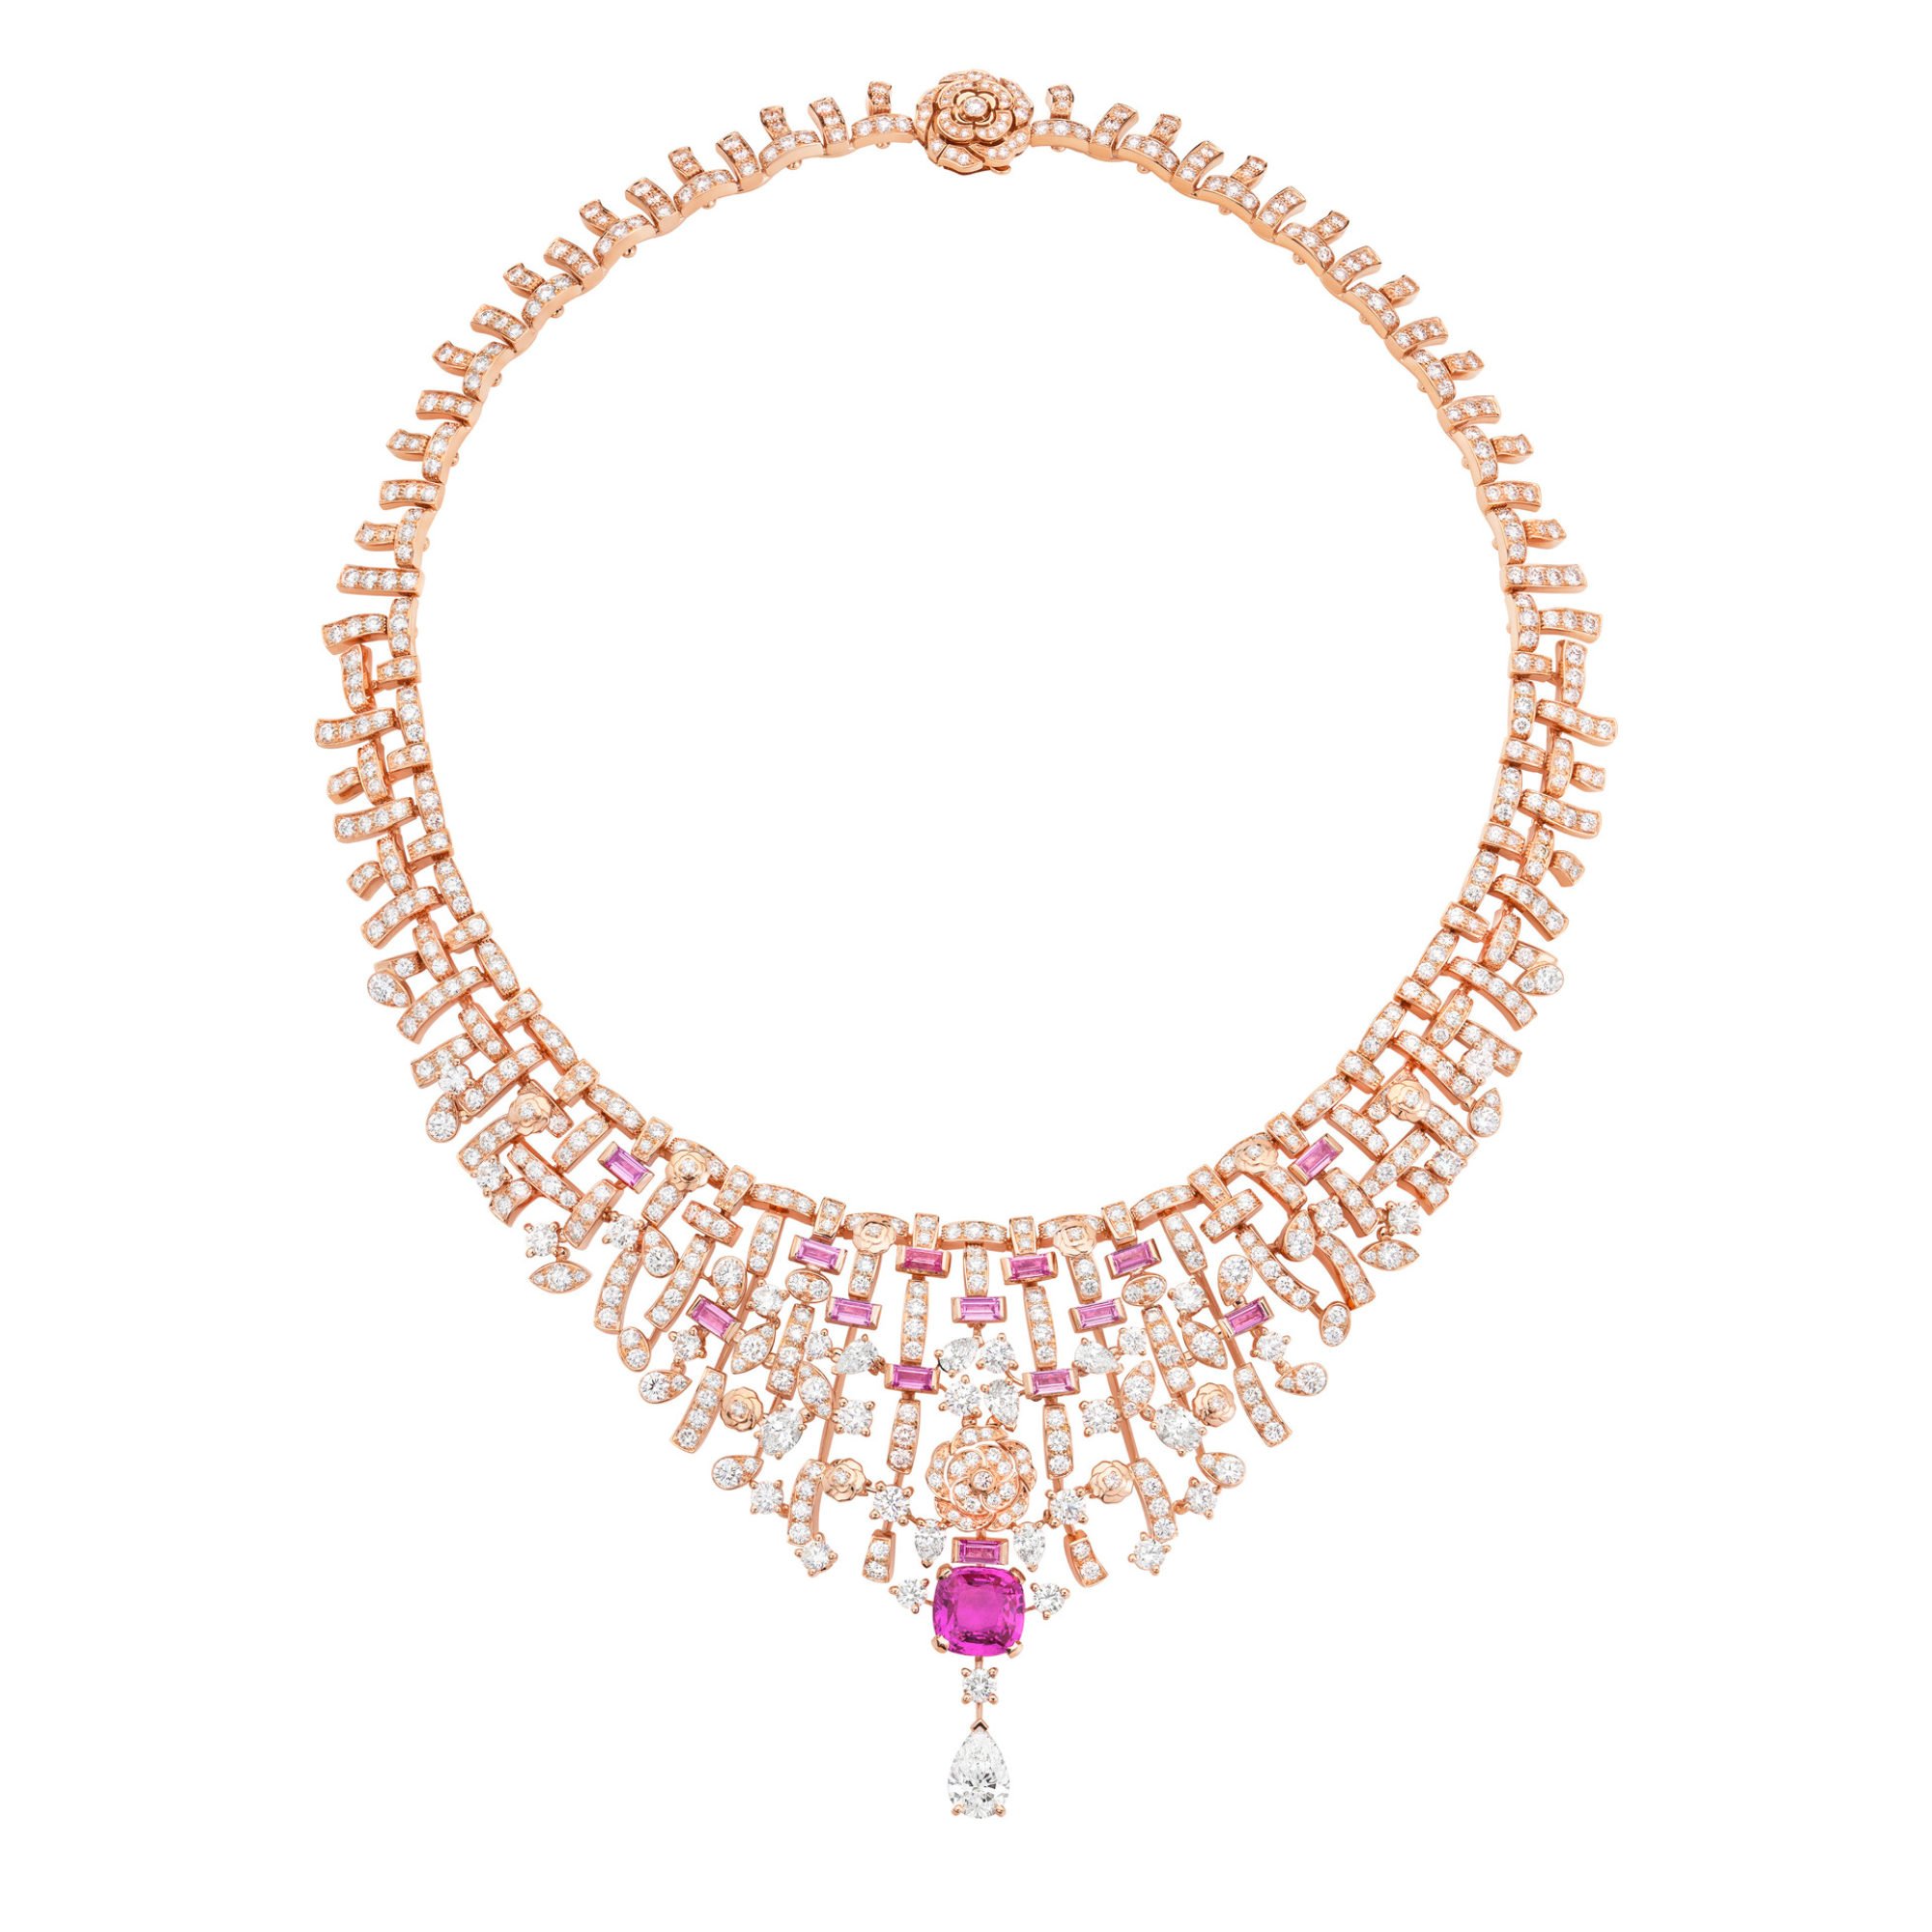 The Lowdown on Chanel's Tweed High Jewellery Collection